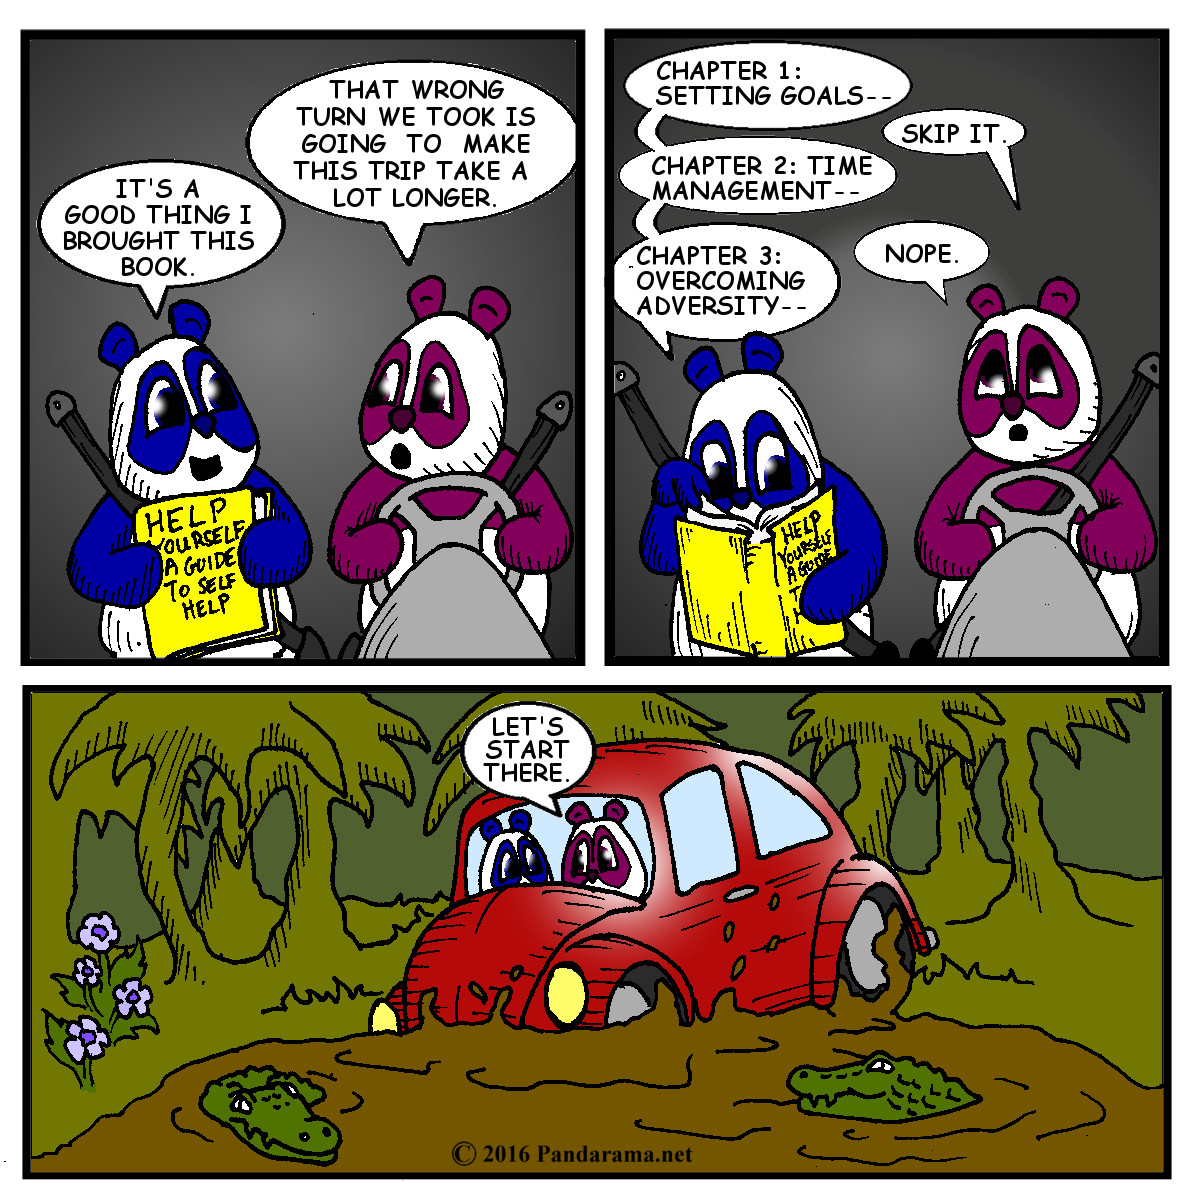 panda cartoon where panda wants to use overcoming-adversity self-help book chapter to get stuck car out of swamp.